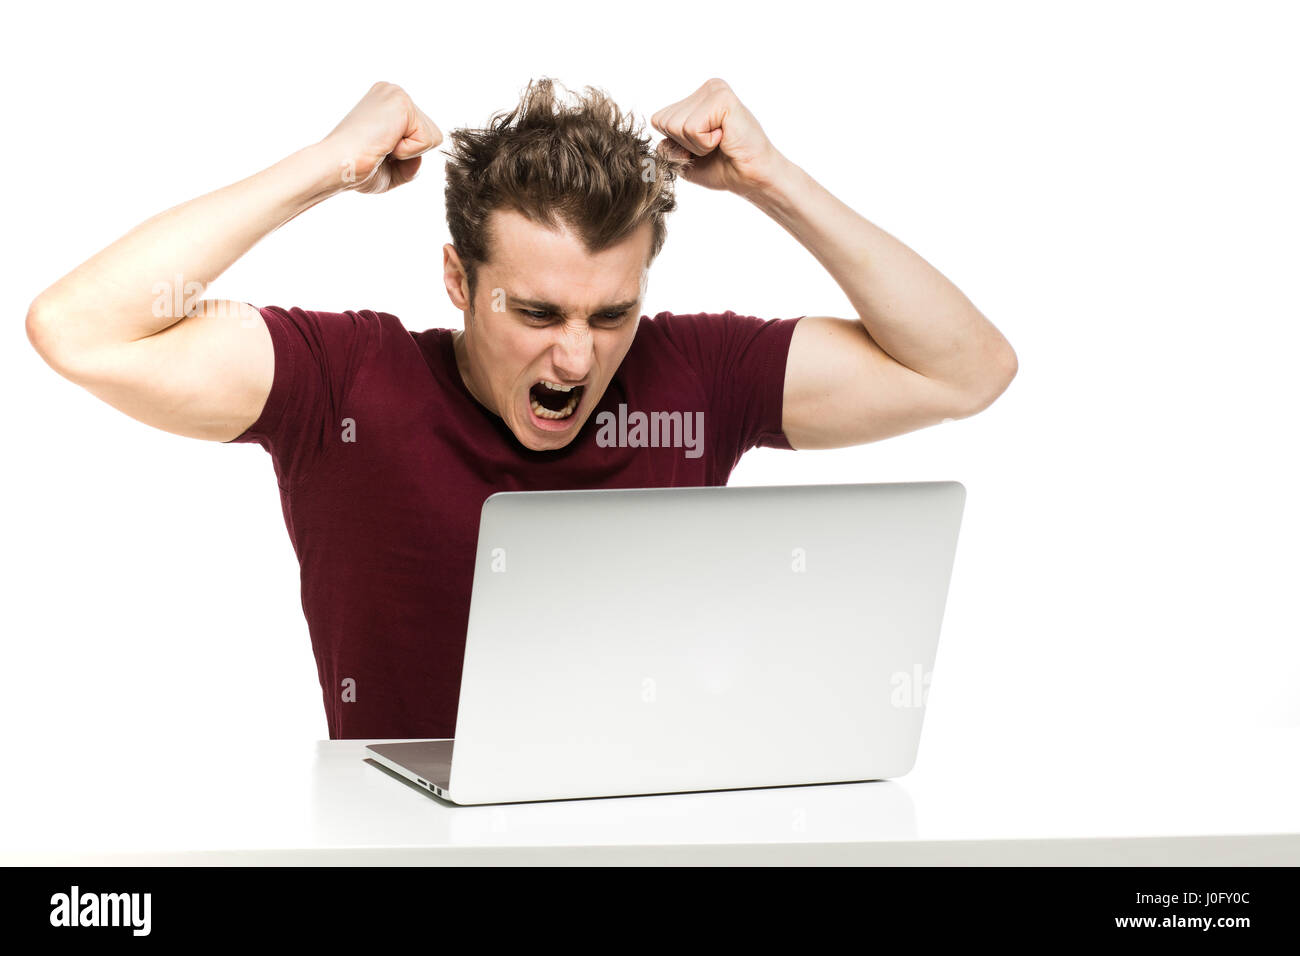 young man in red shirt sitting at table with laptop in front being very angry, isolated on white Stock Photo